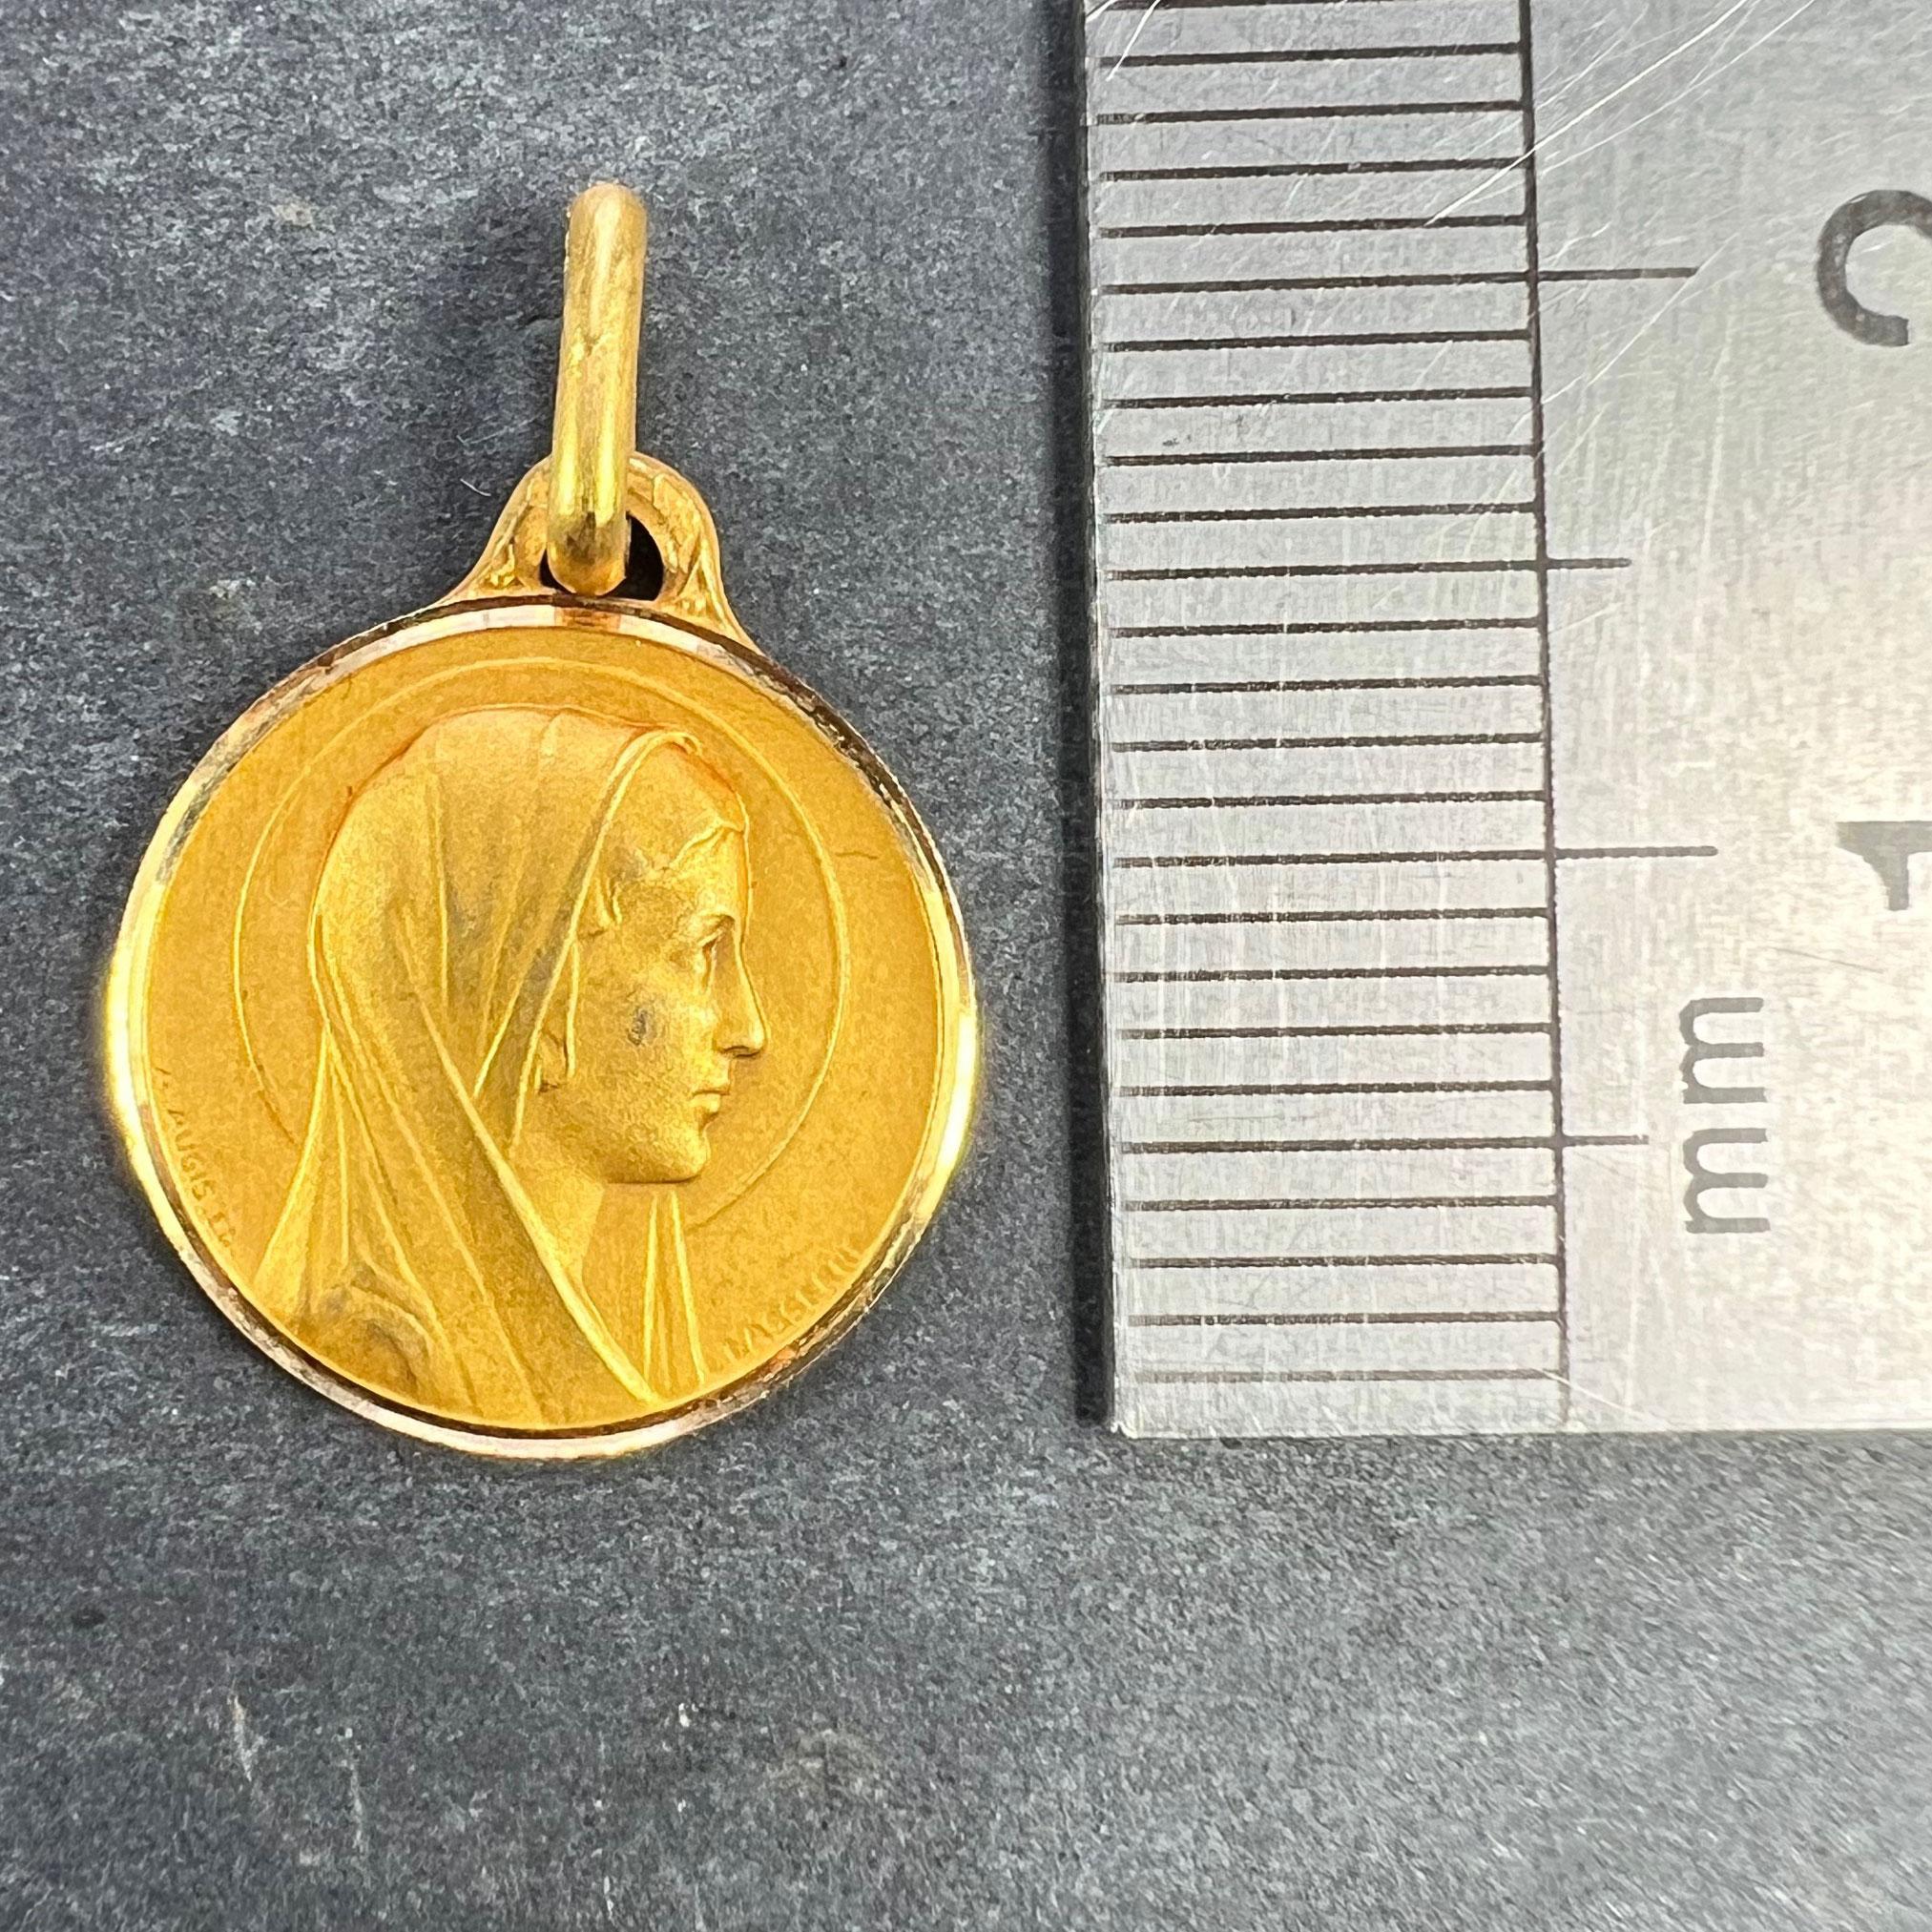 French Augis Lasserre Virgin Mary 18K Yellow Gold Medal Pendant For Sale 5